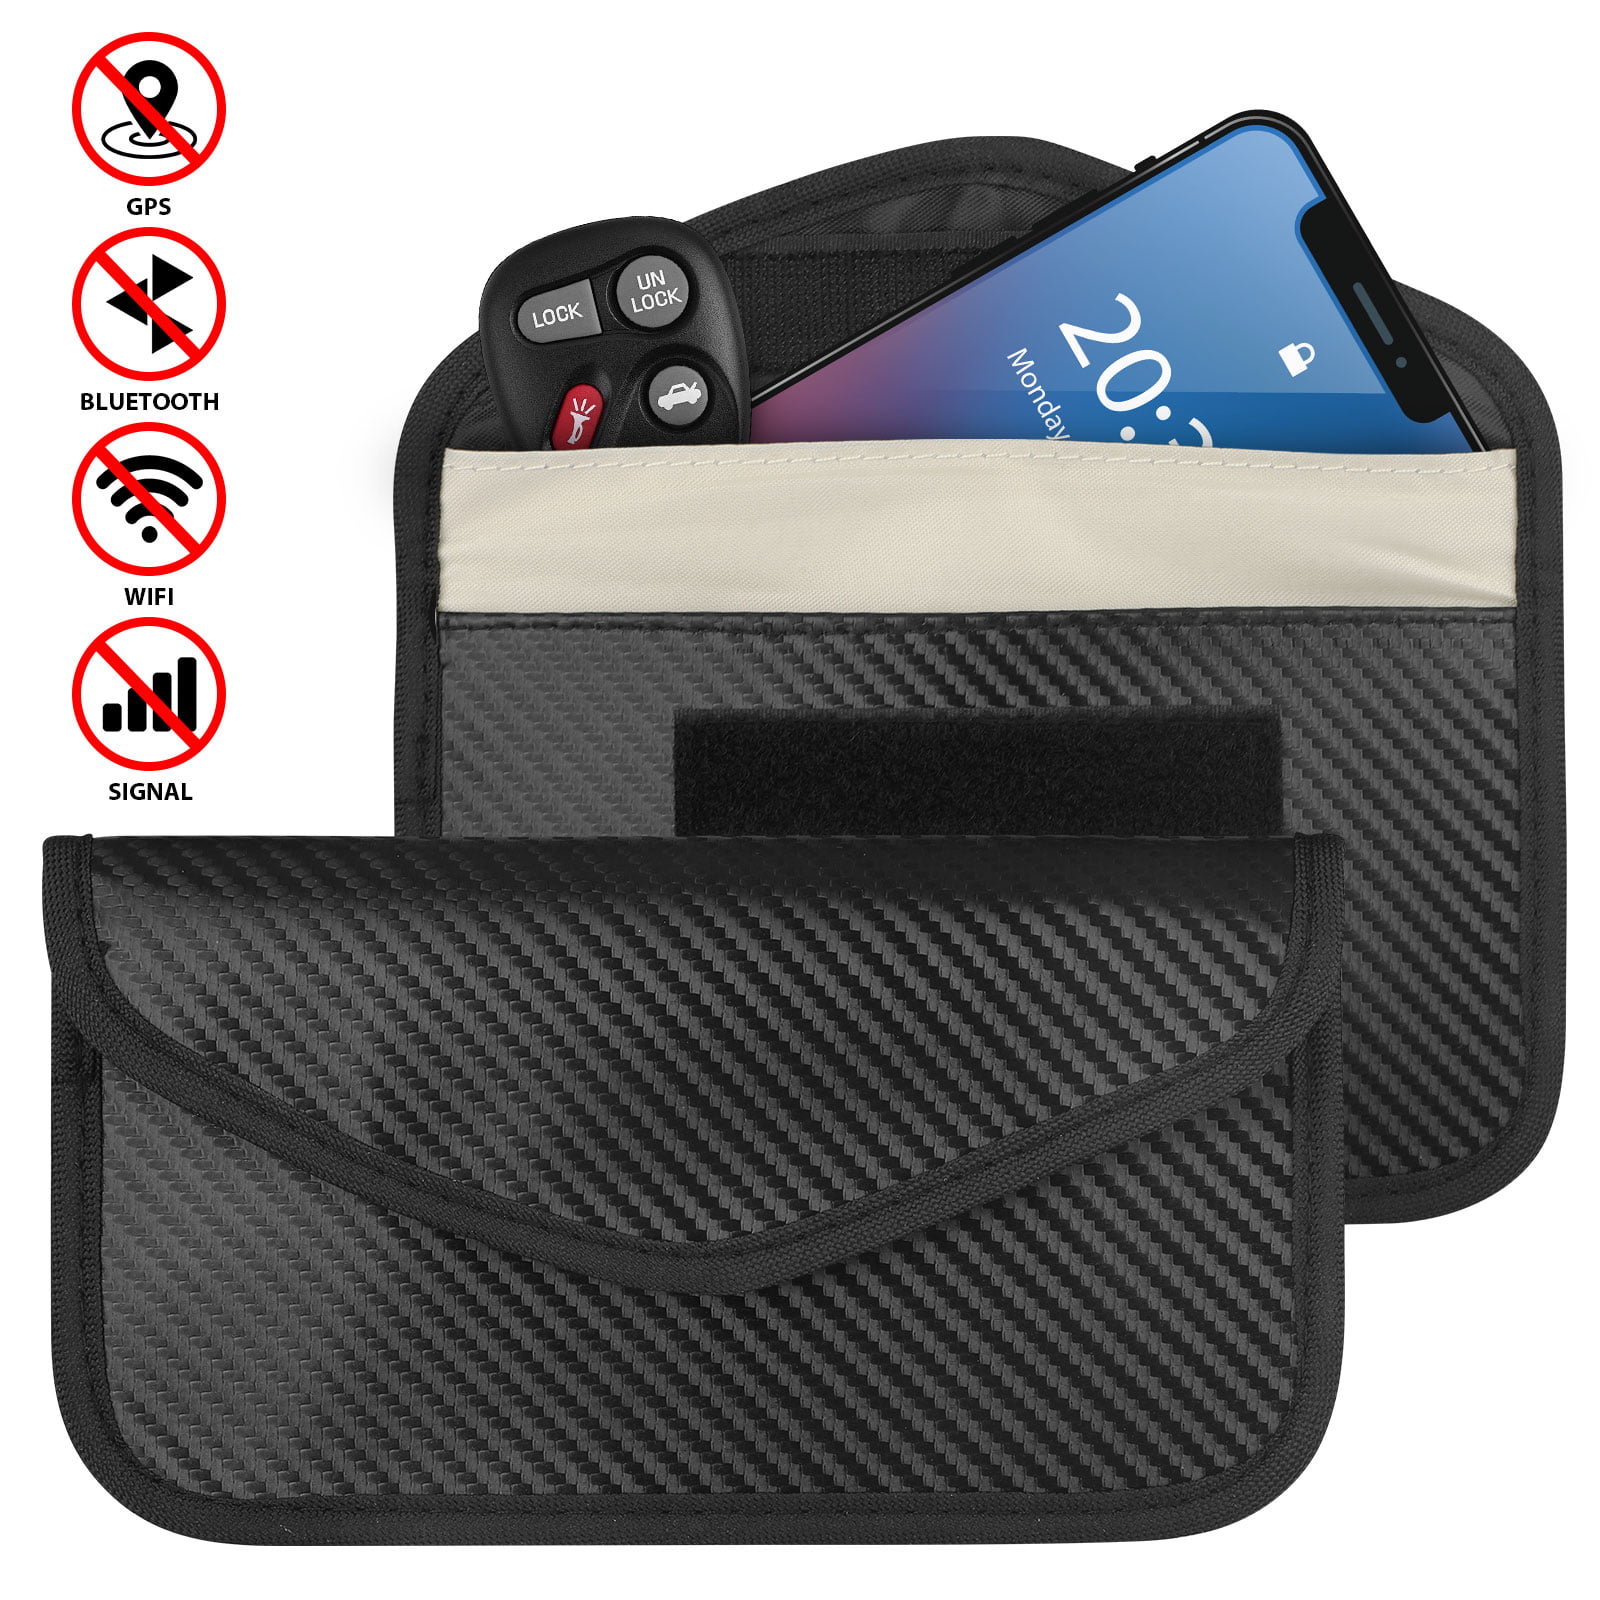 RFID Signal Blocking Bag Shielding Pouch Wallet Case for Cell Phone CarKey Black 